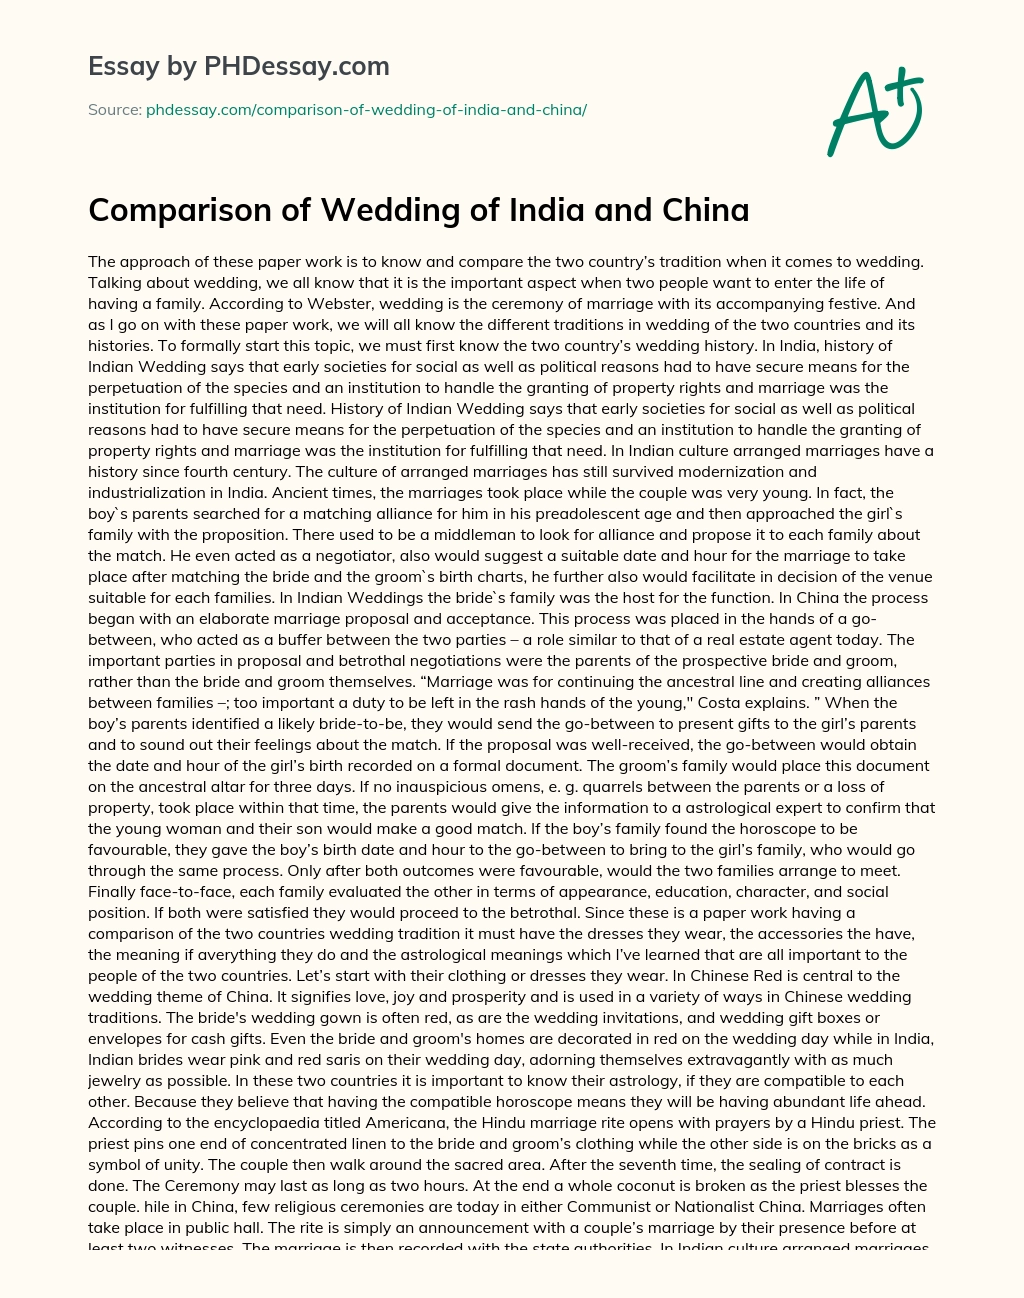 Comparison of Wedding of India and China essay